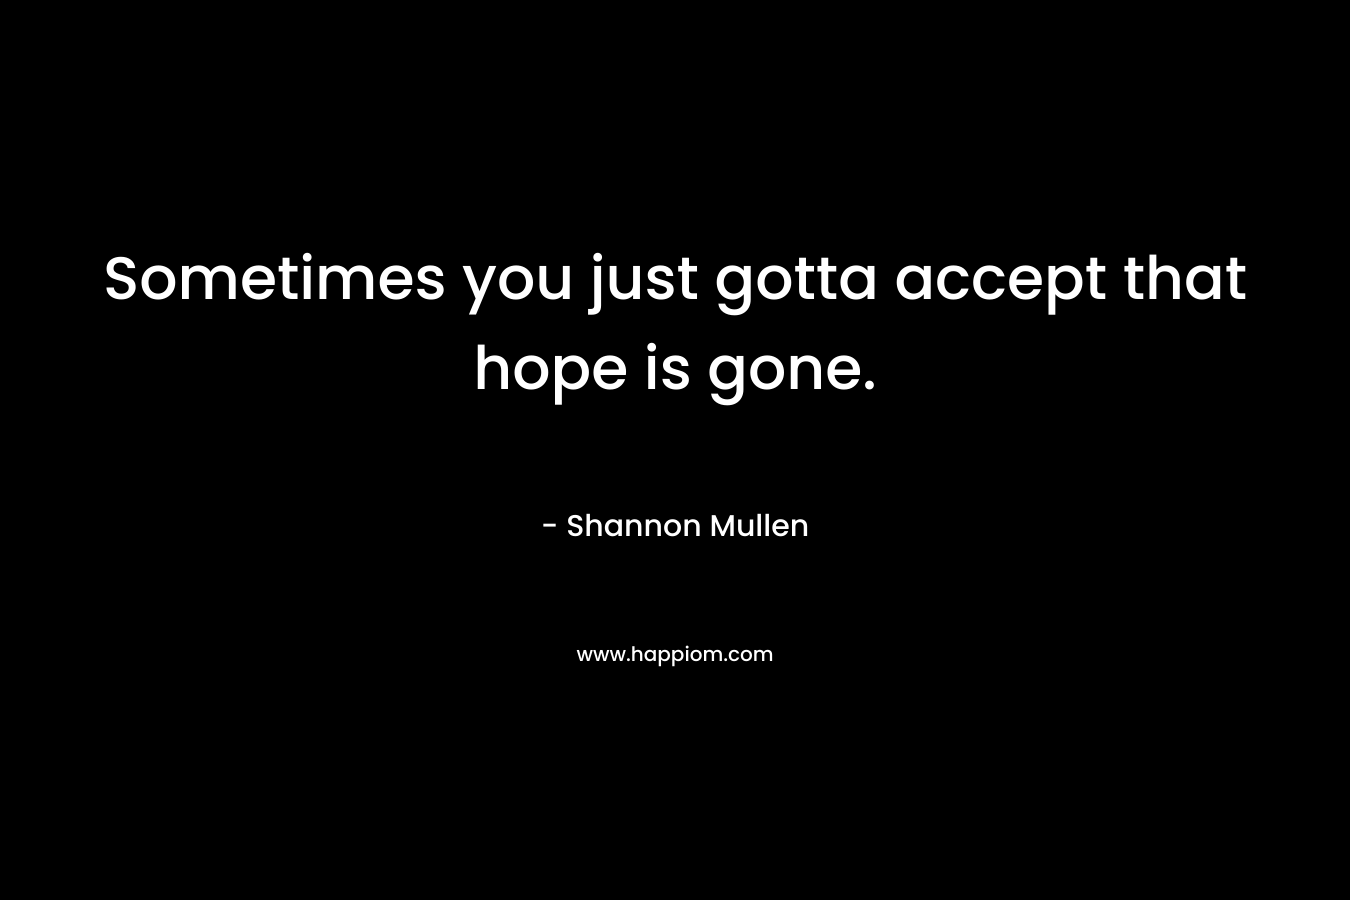 Sometimes you just gotta accept that hope is gone.